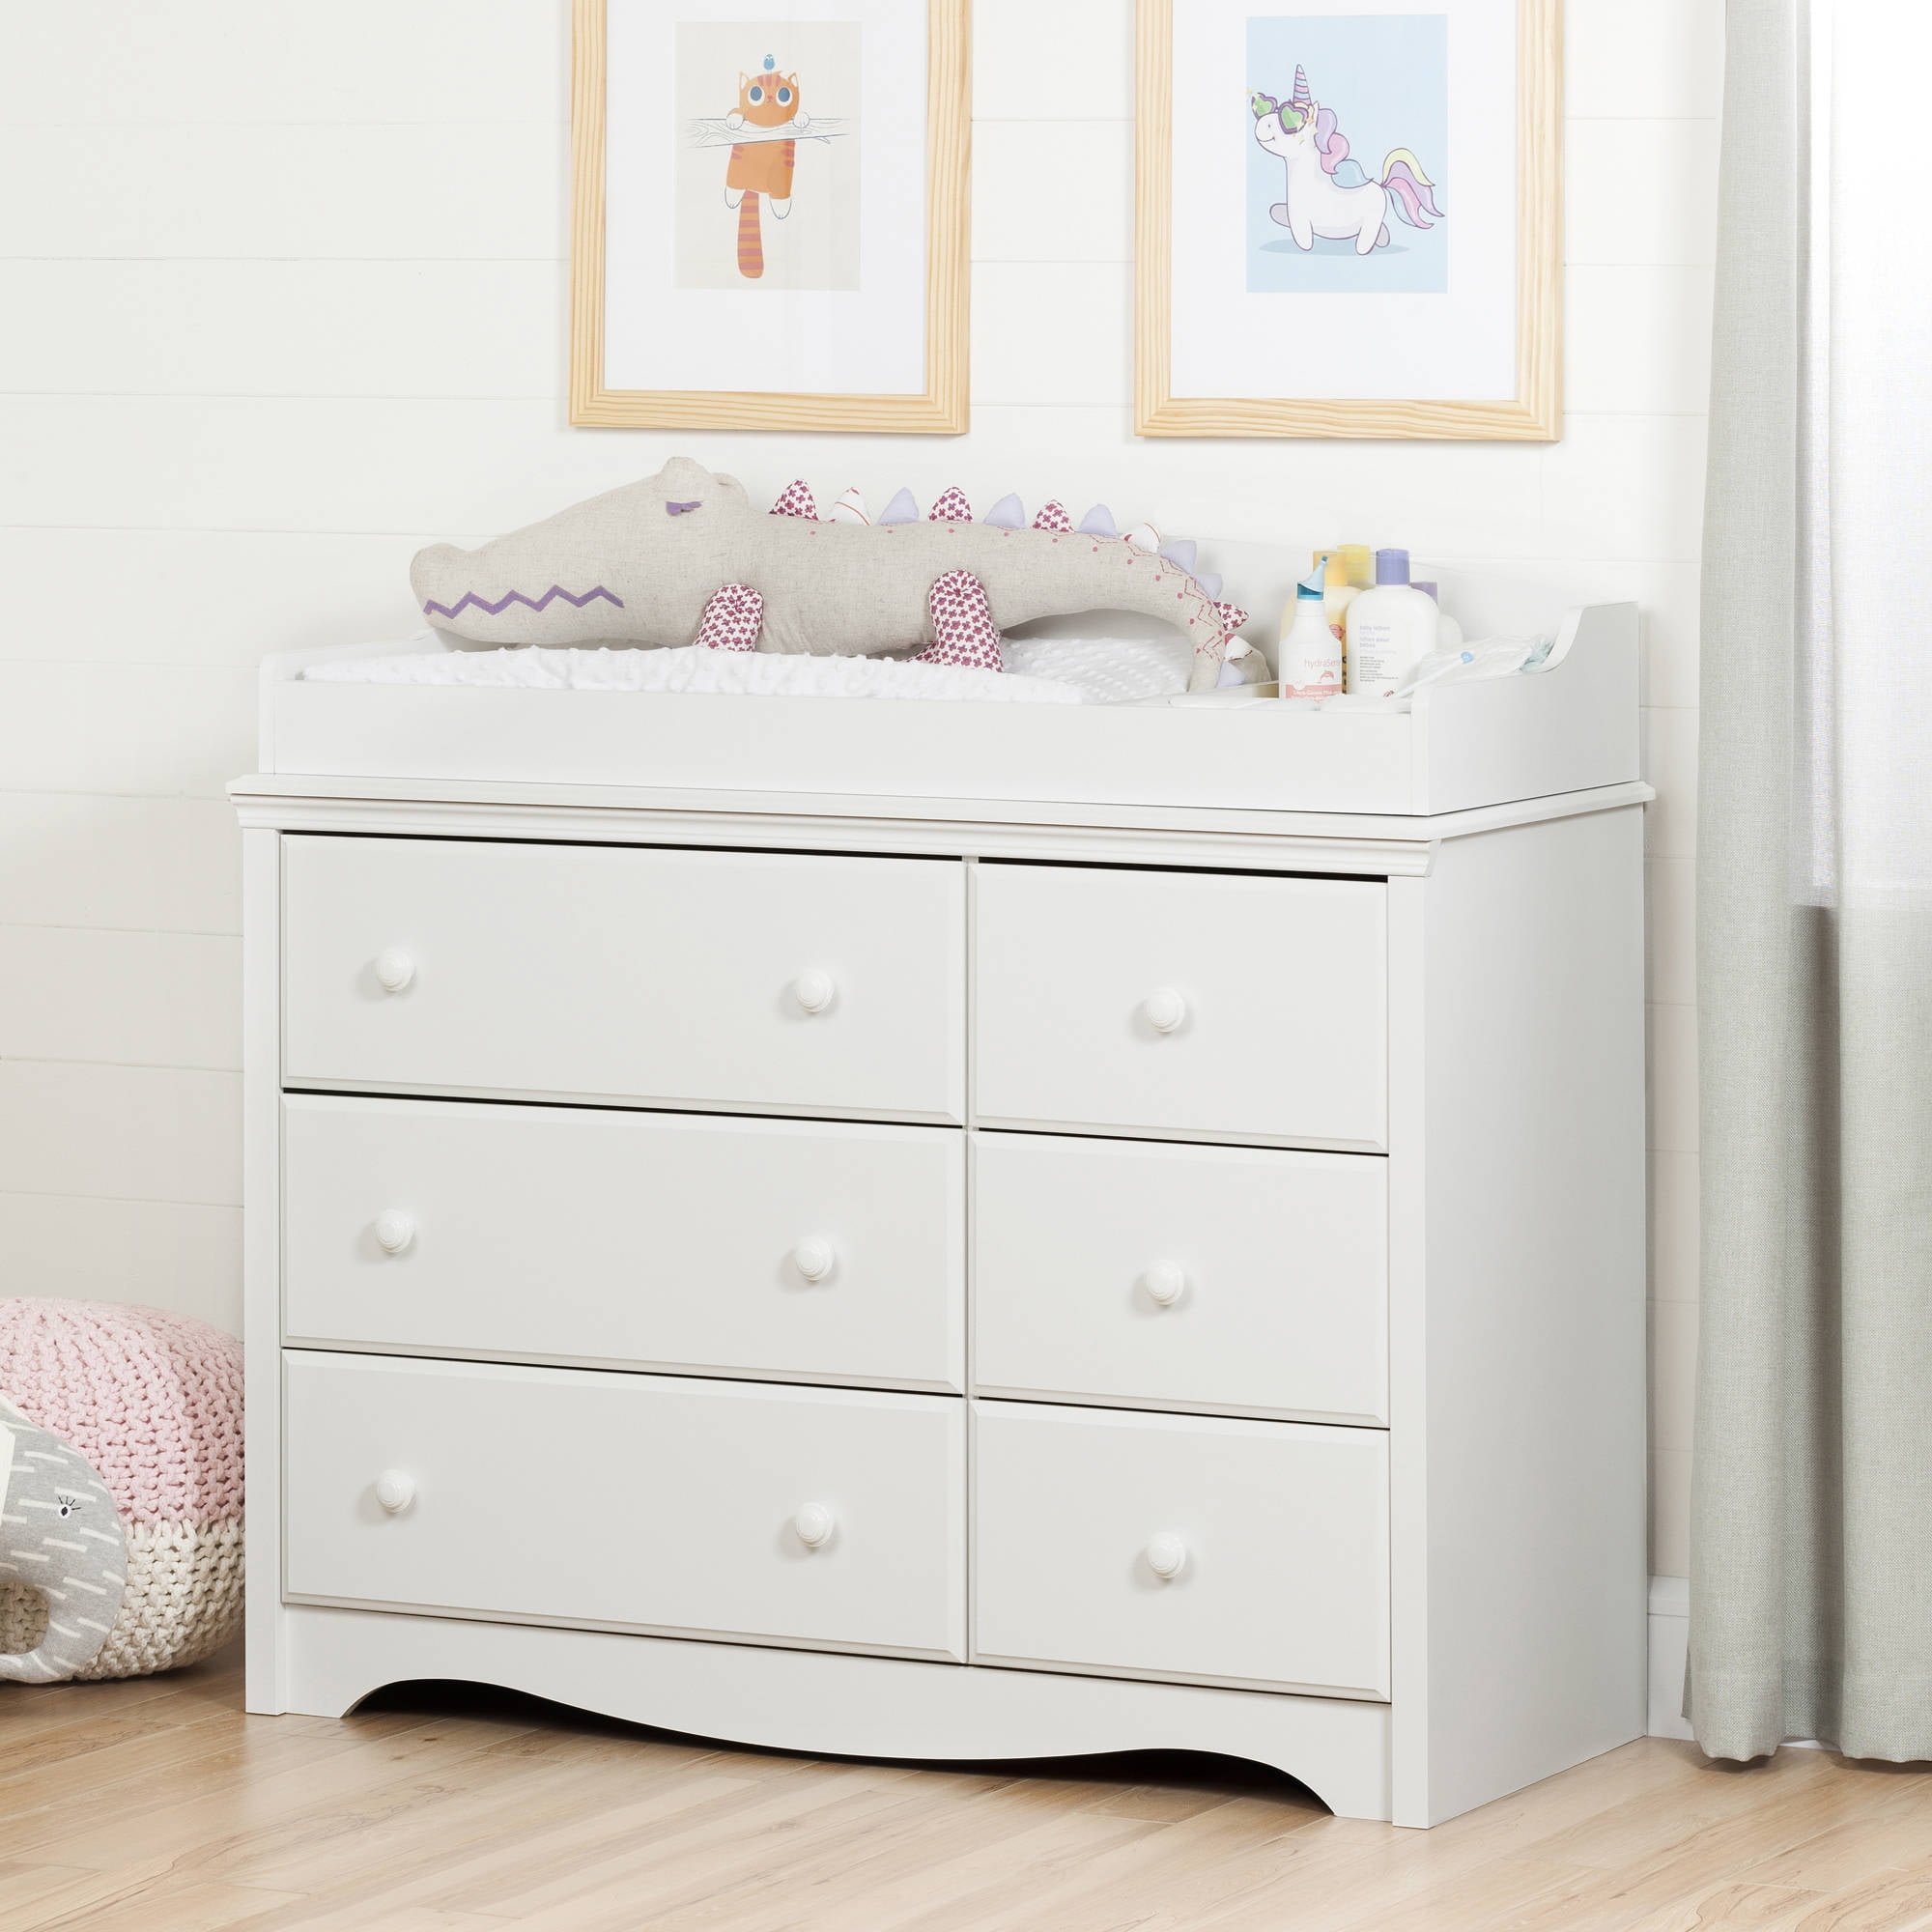 changing table cheap